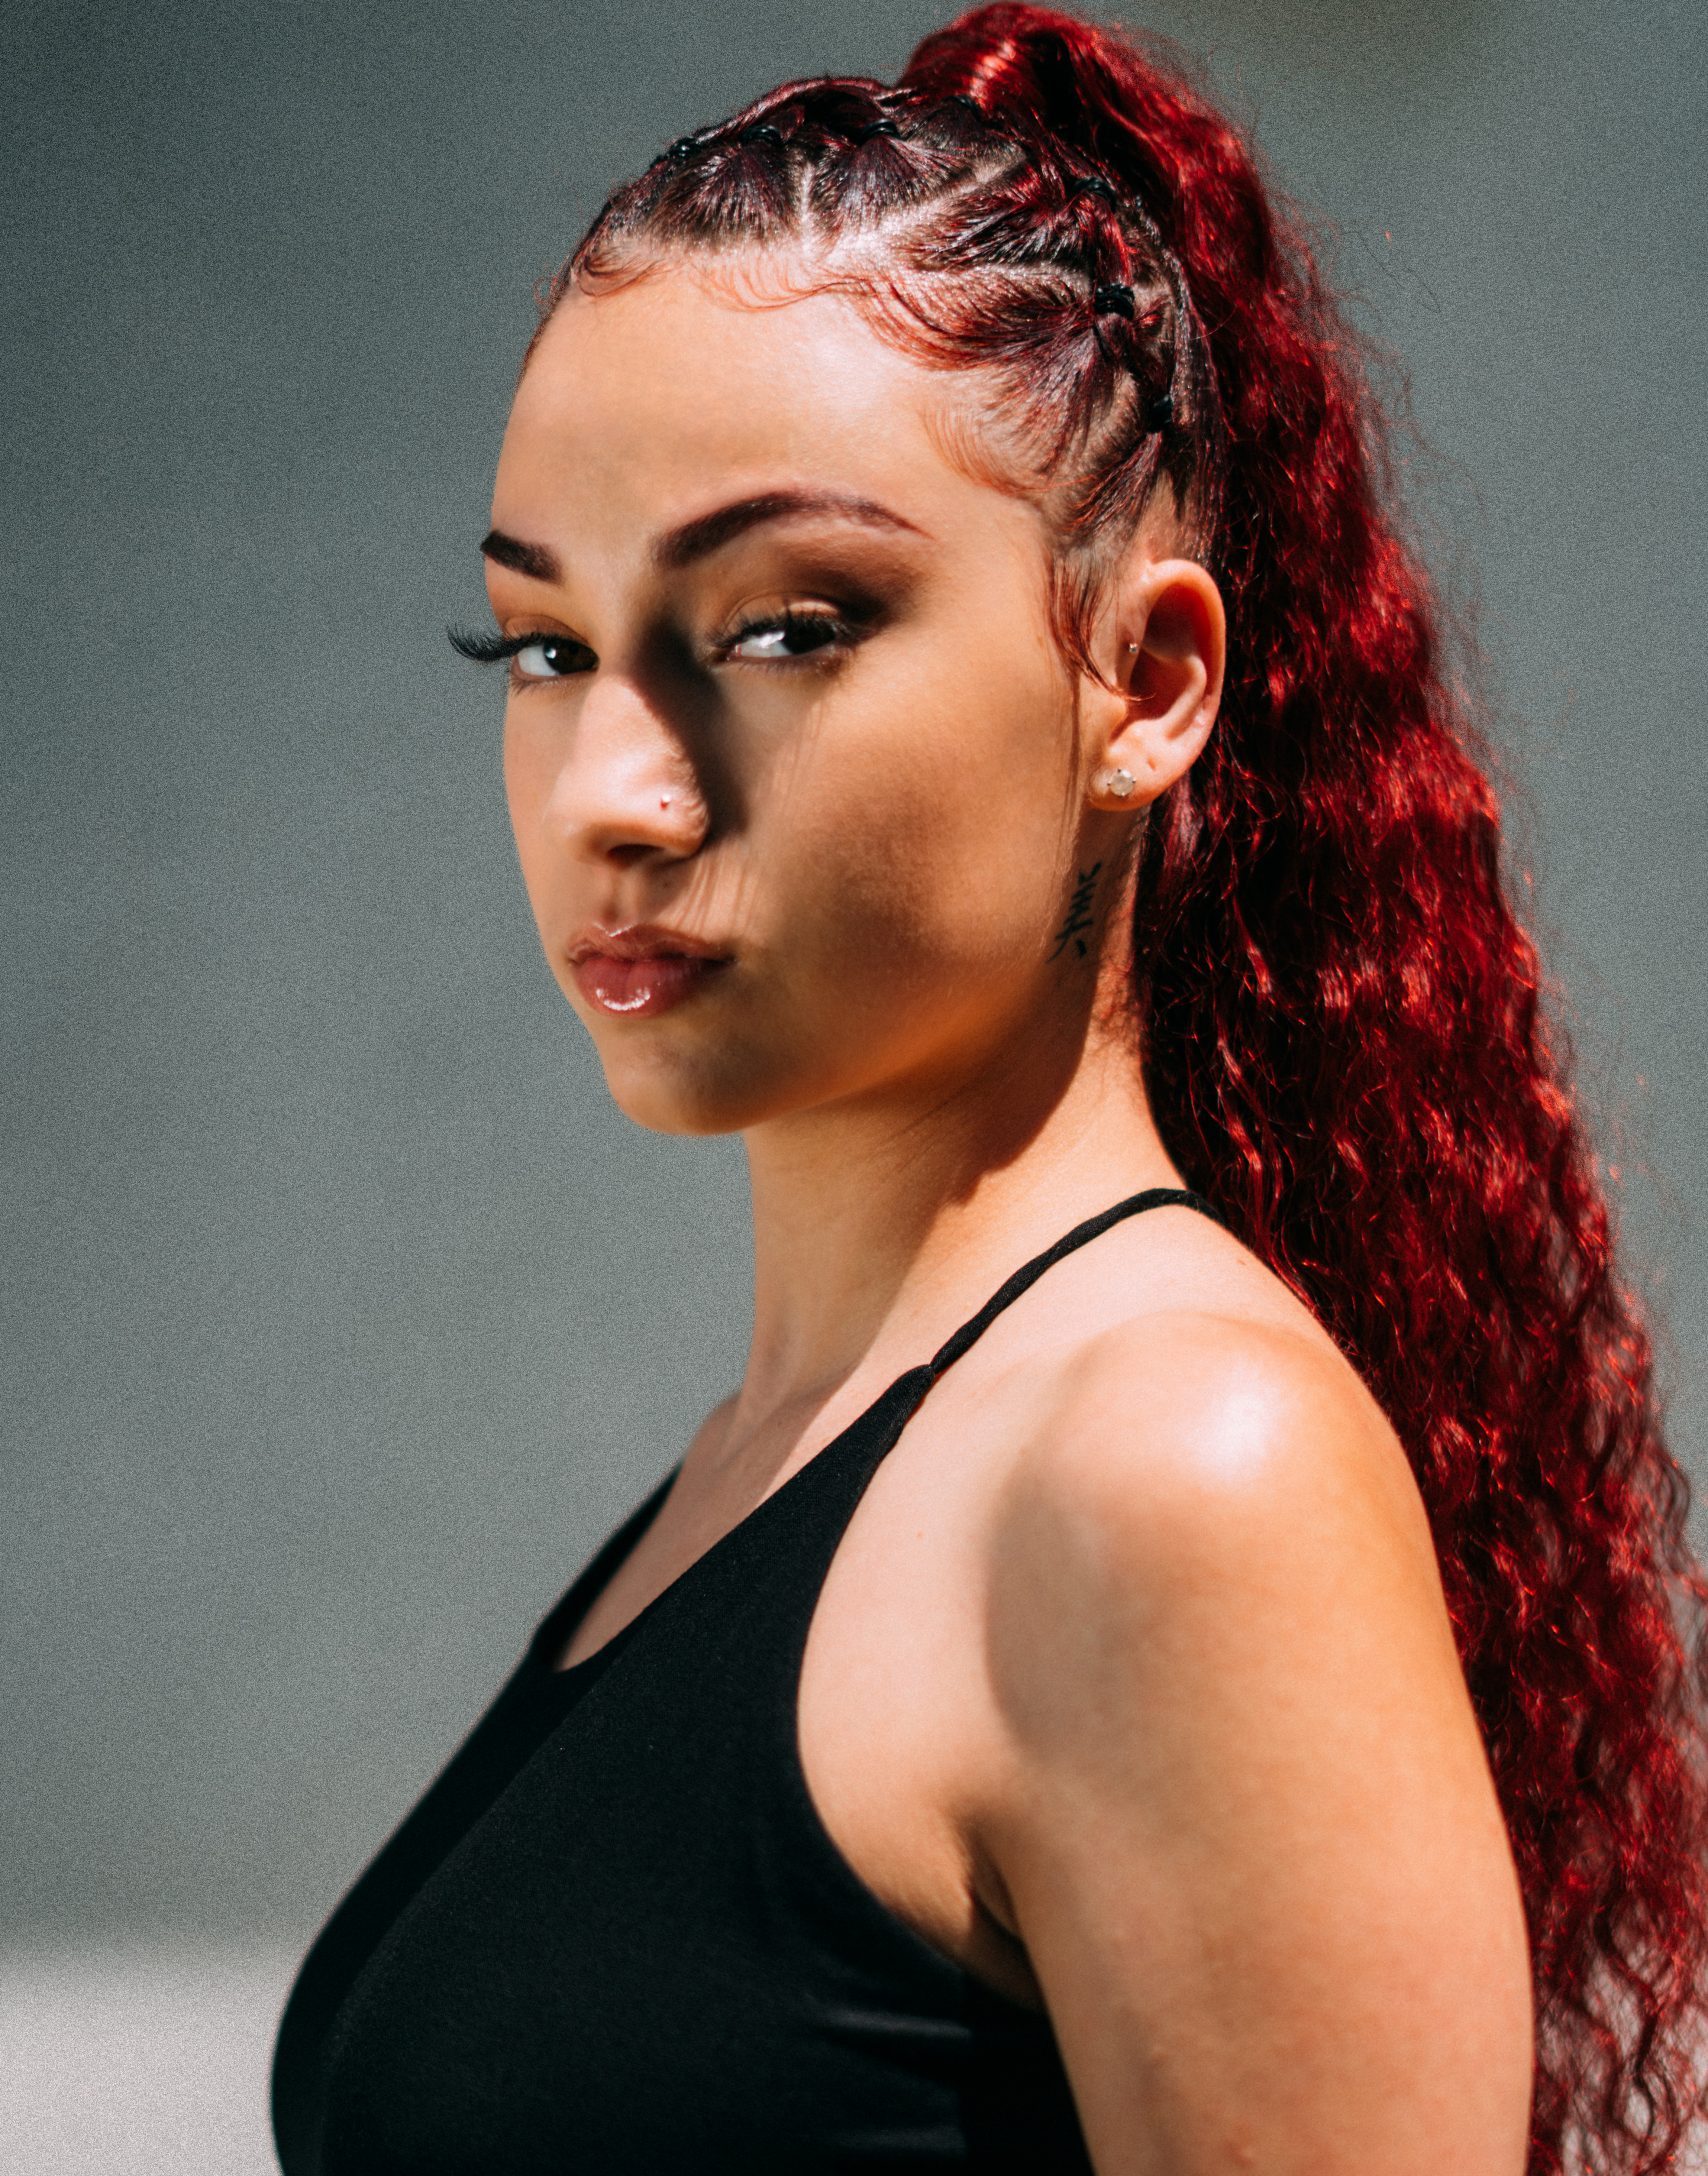 Bhad bhabie onlyfams